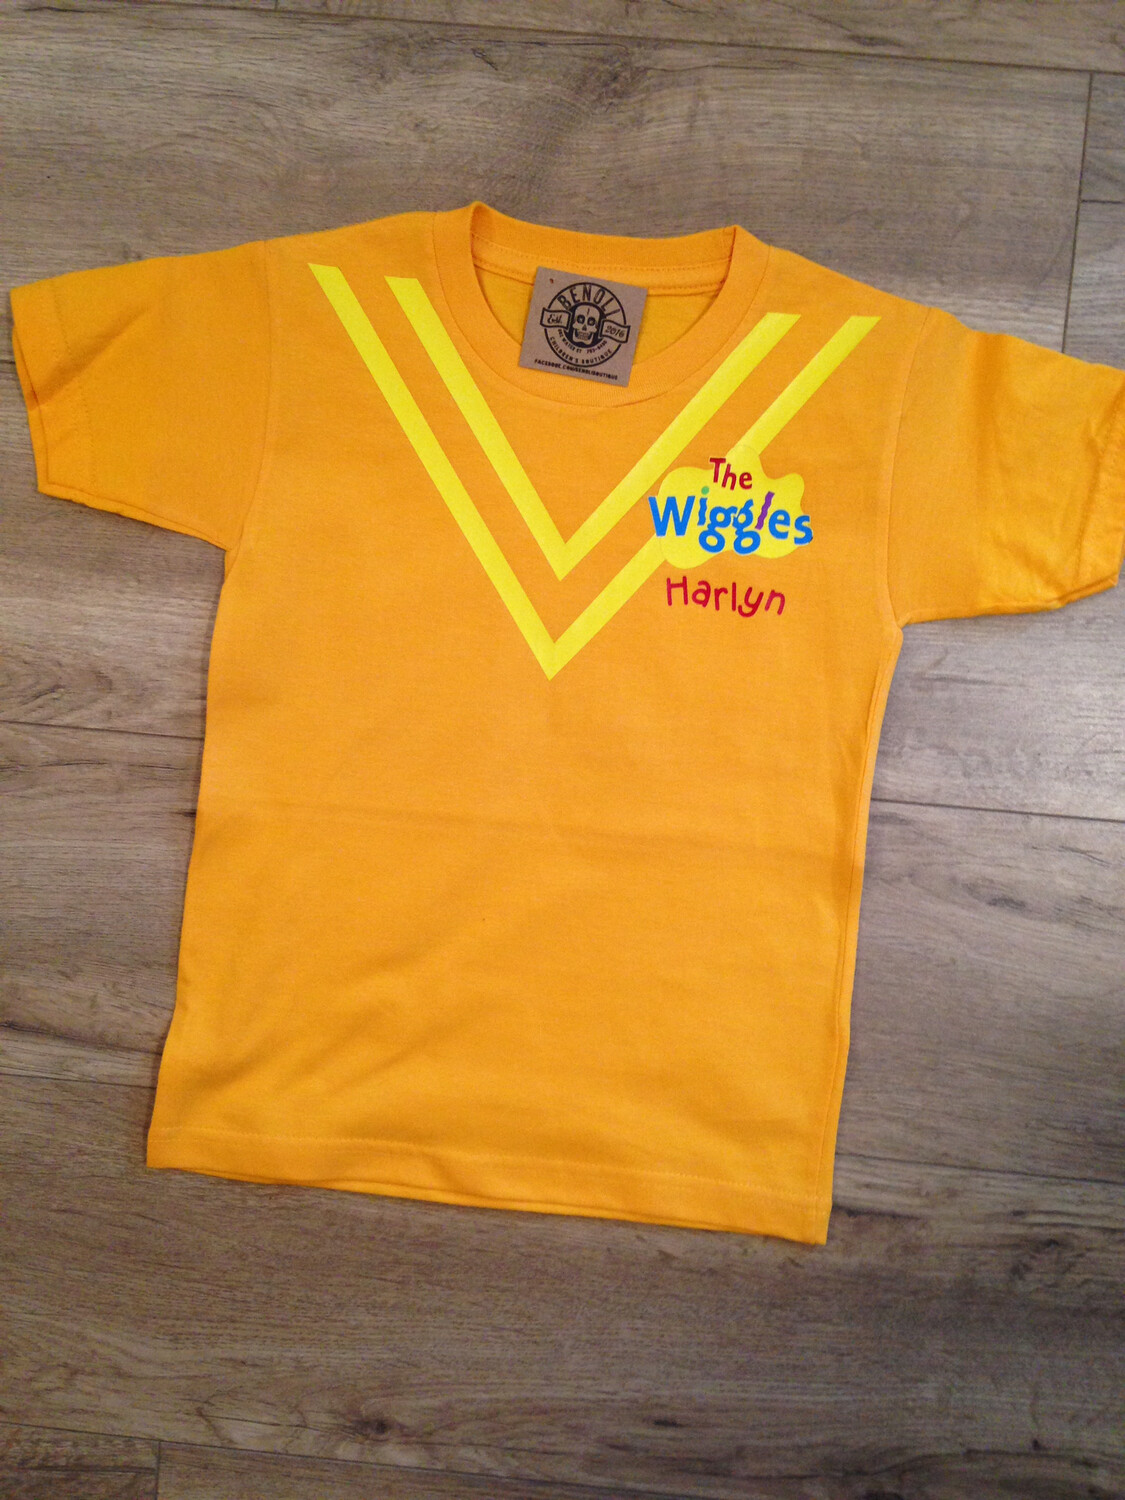 The Wiggles On-Screen shirt